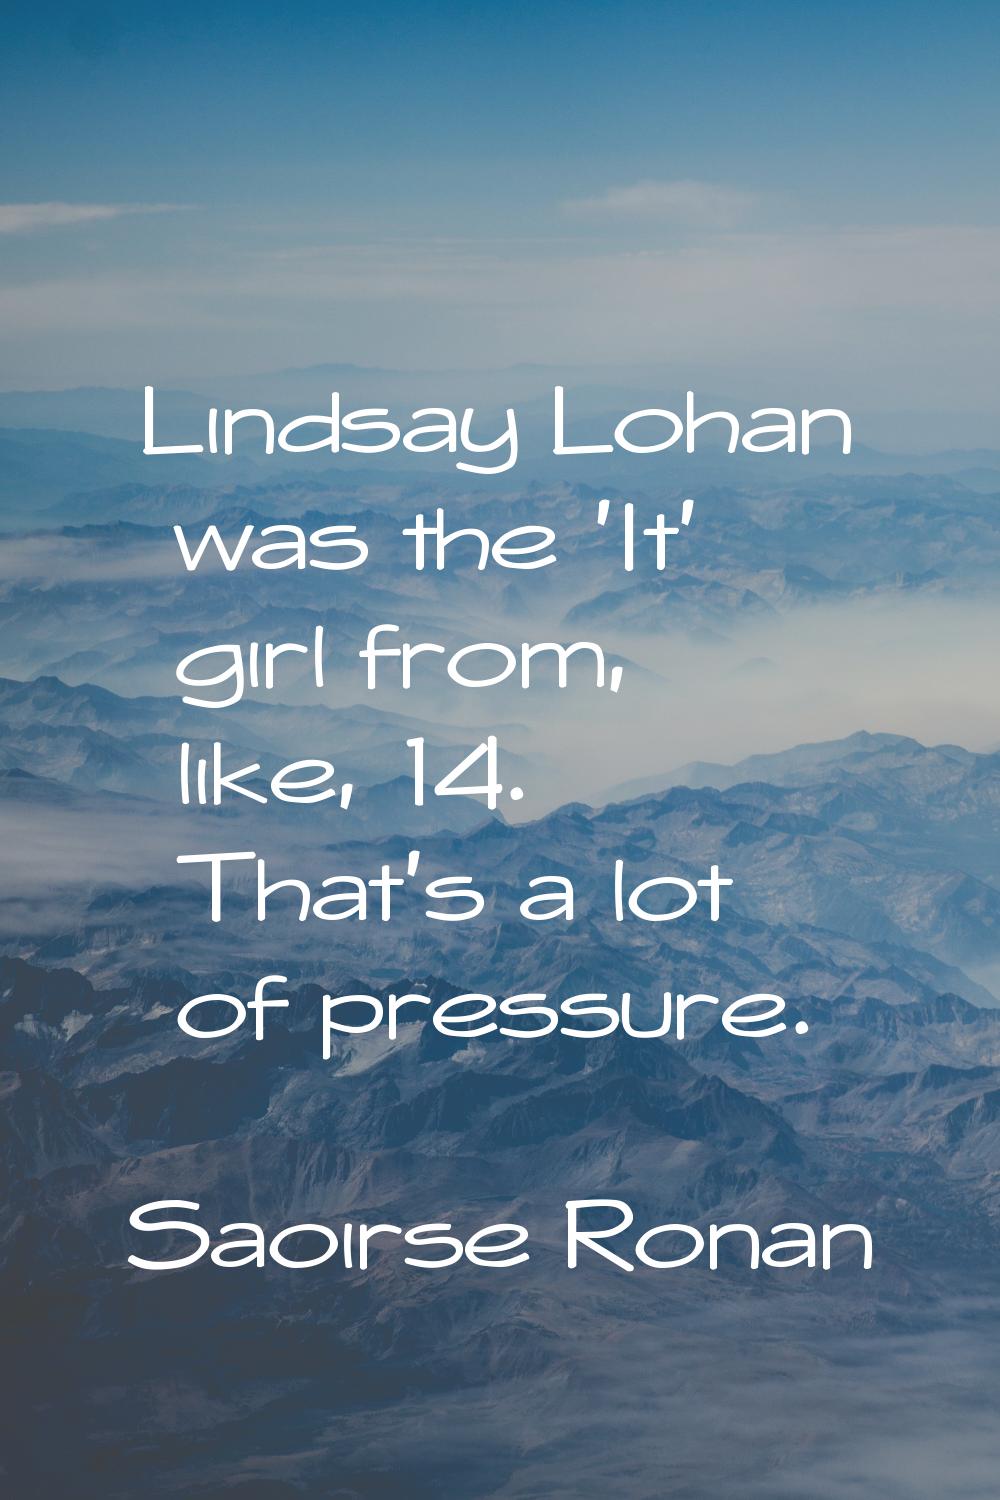 Lindsay Lohan was the 'It' girl from, like, 14. That's a lot of pressure.